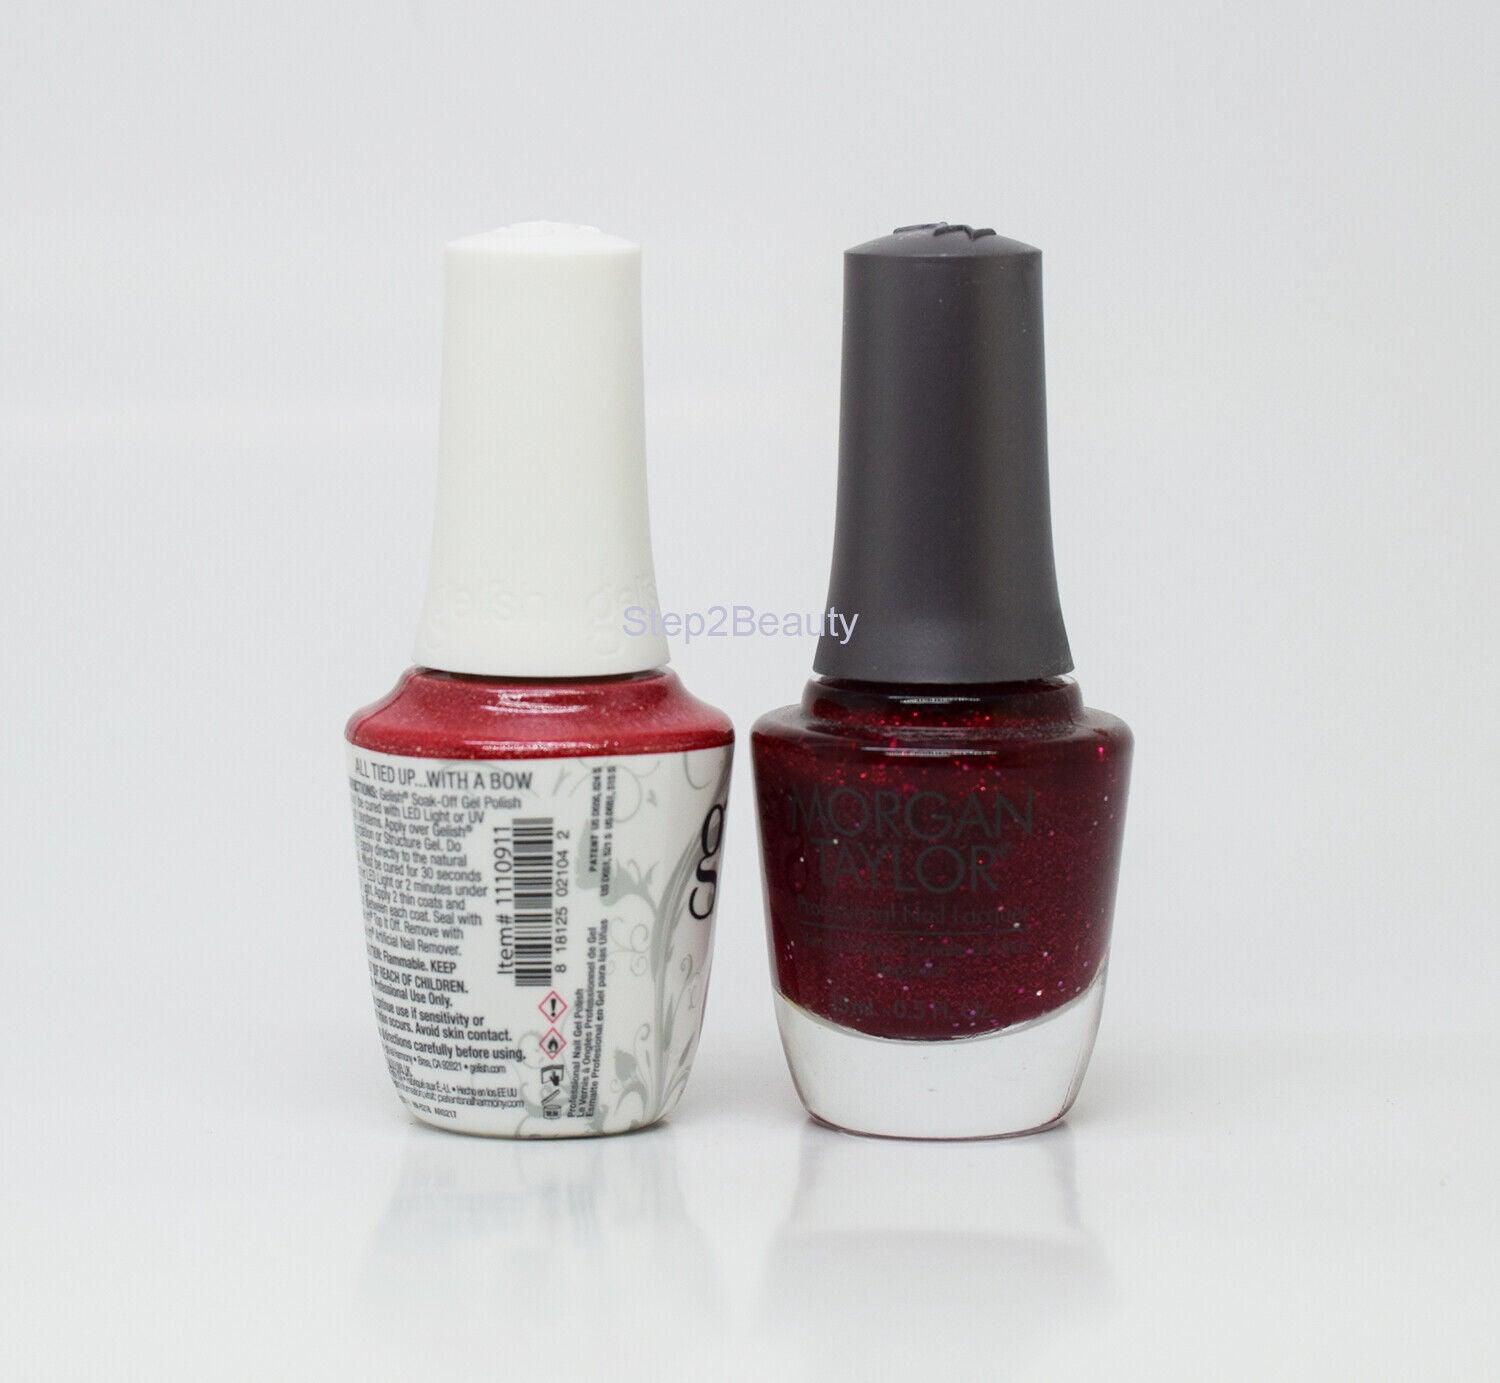 Gelish DUO Soak Off Gel Polish + Morgan Taylor Lacquer #911 All Tied Up... With